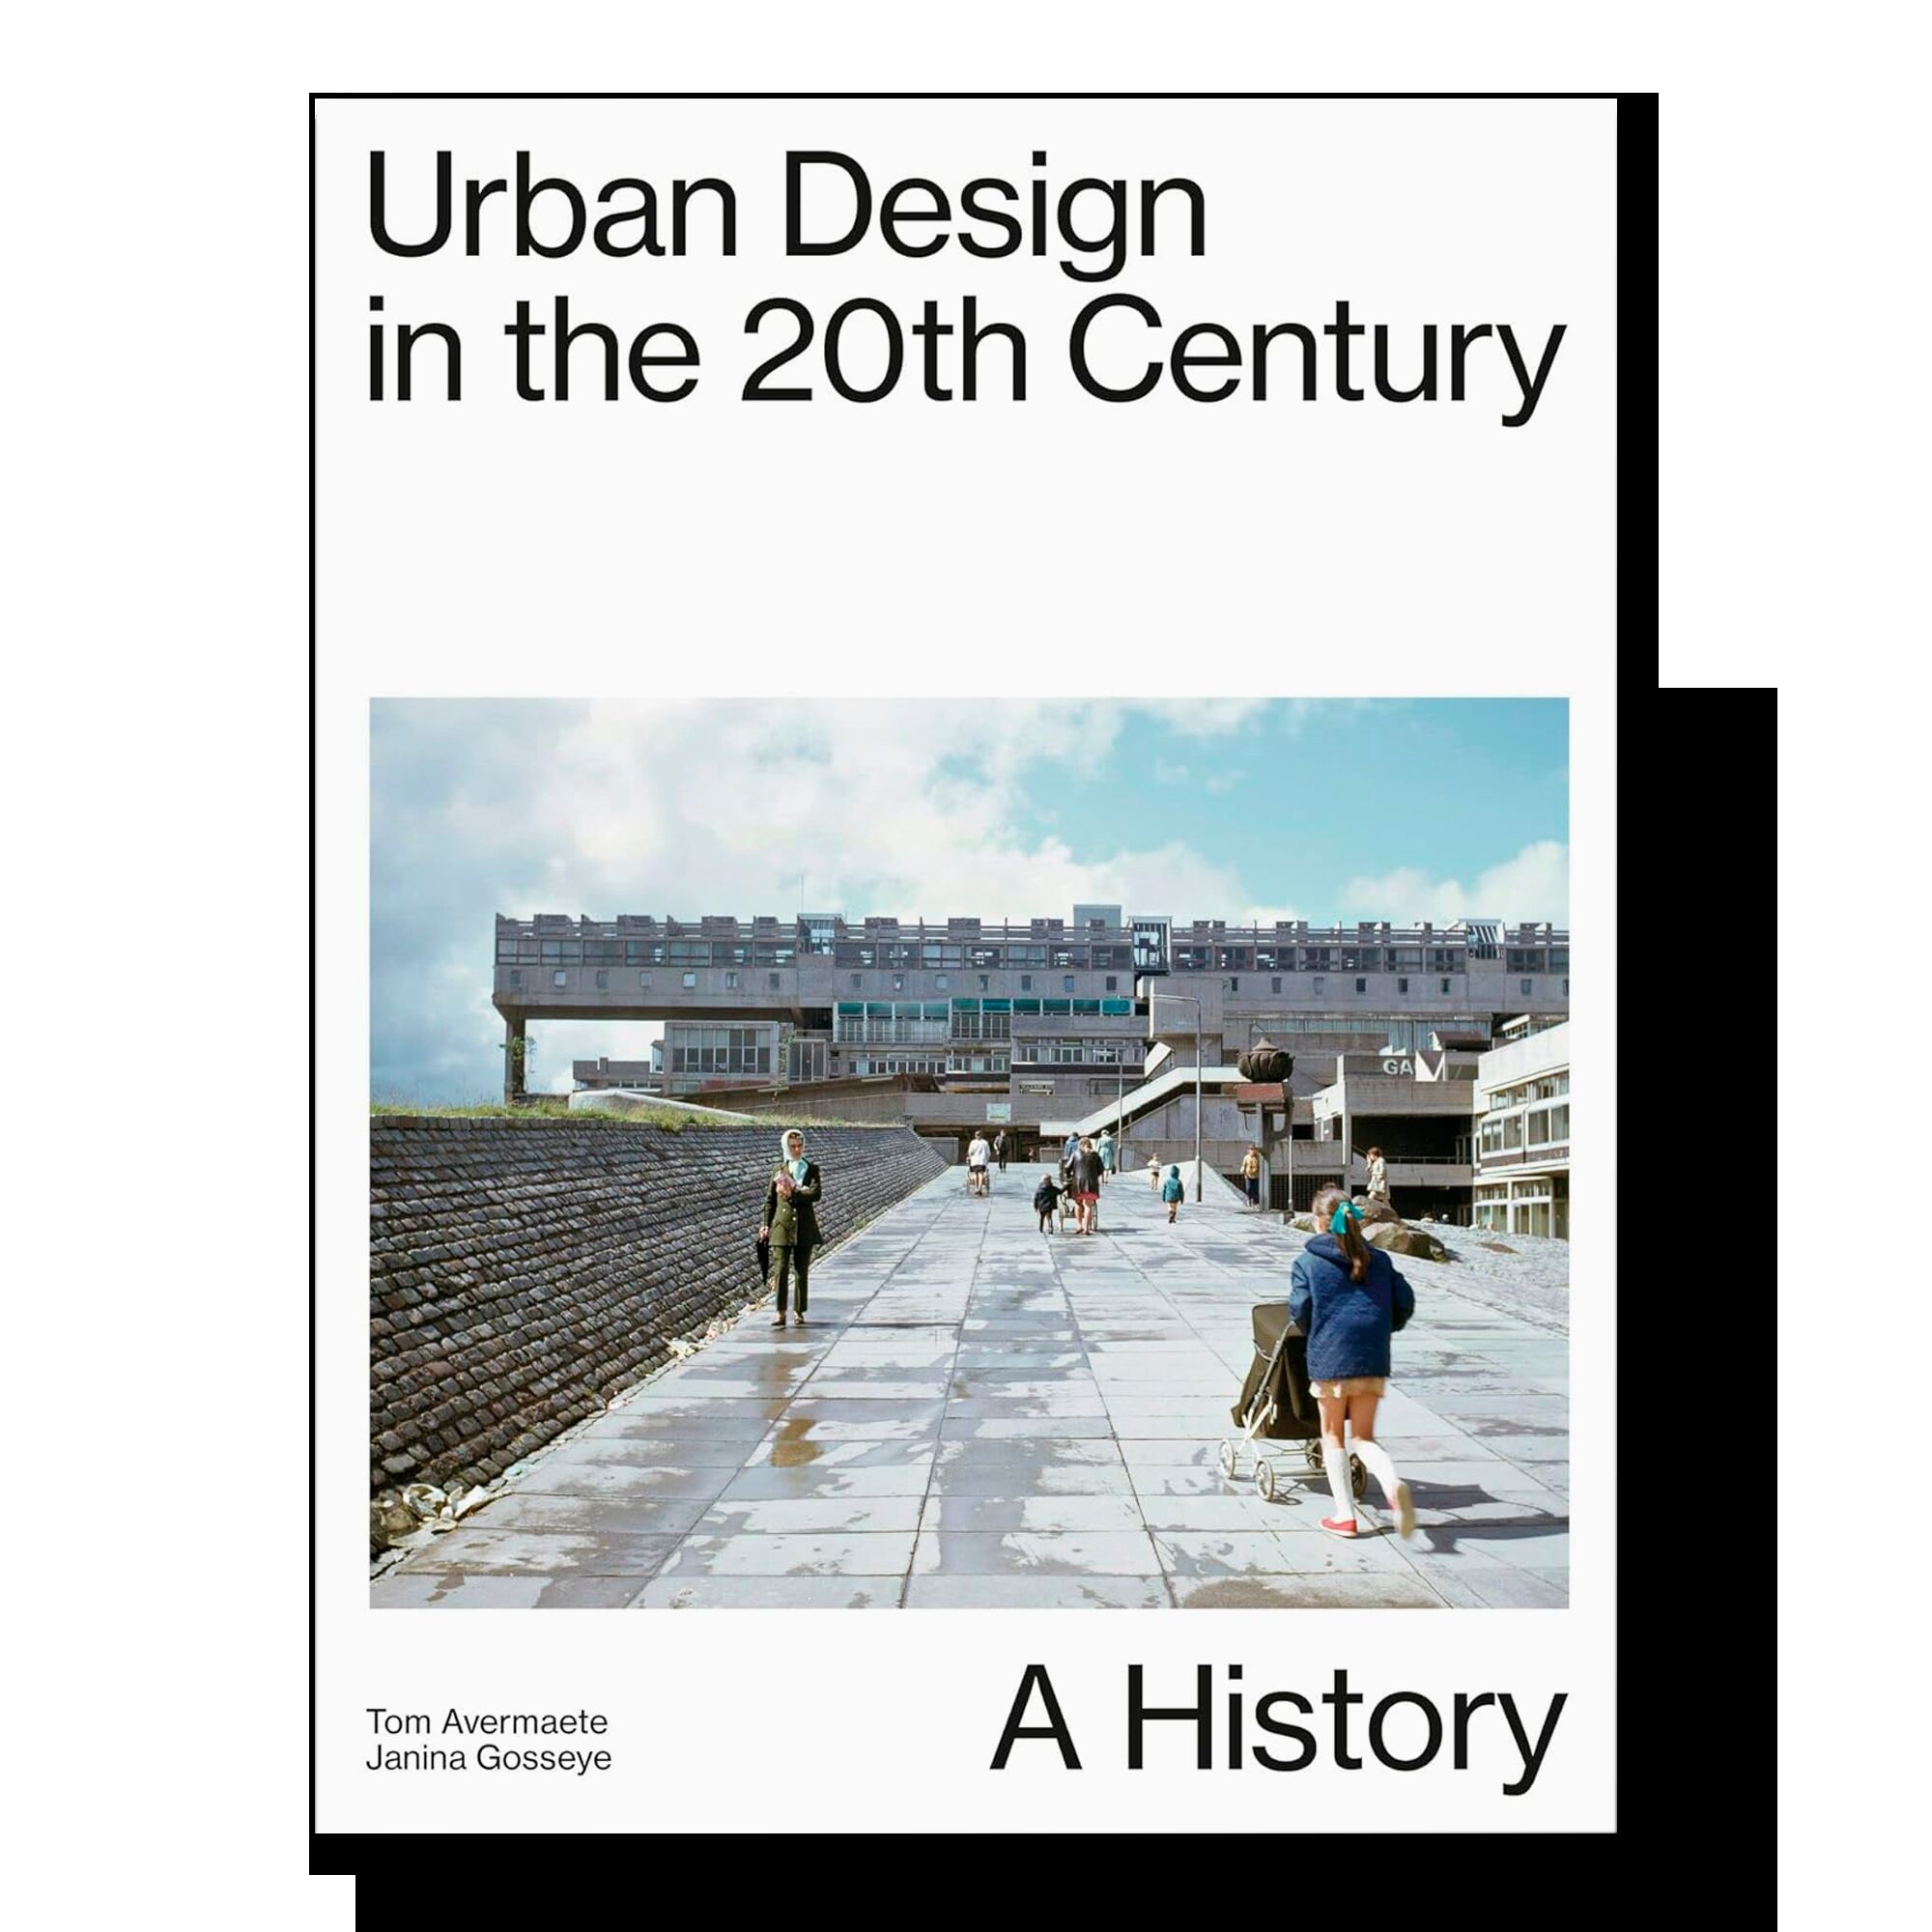 Urban Design in the 20th Century - A History